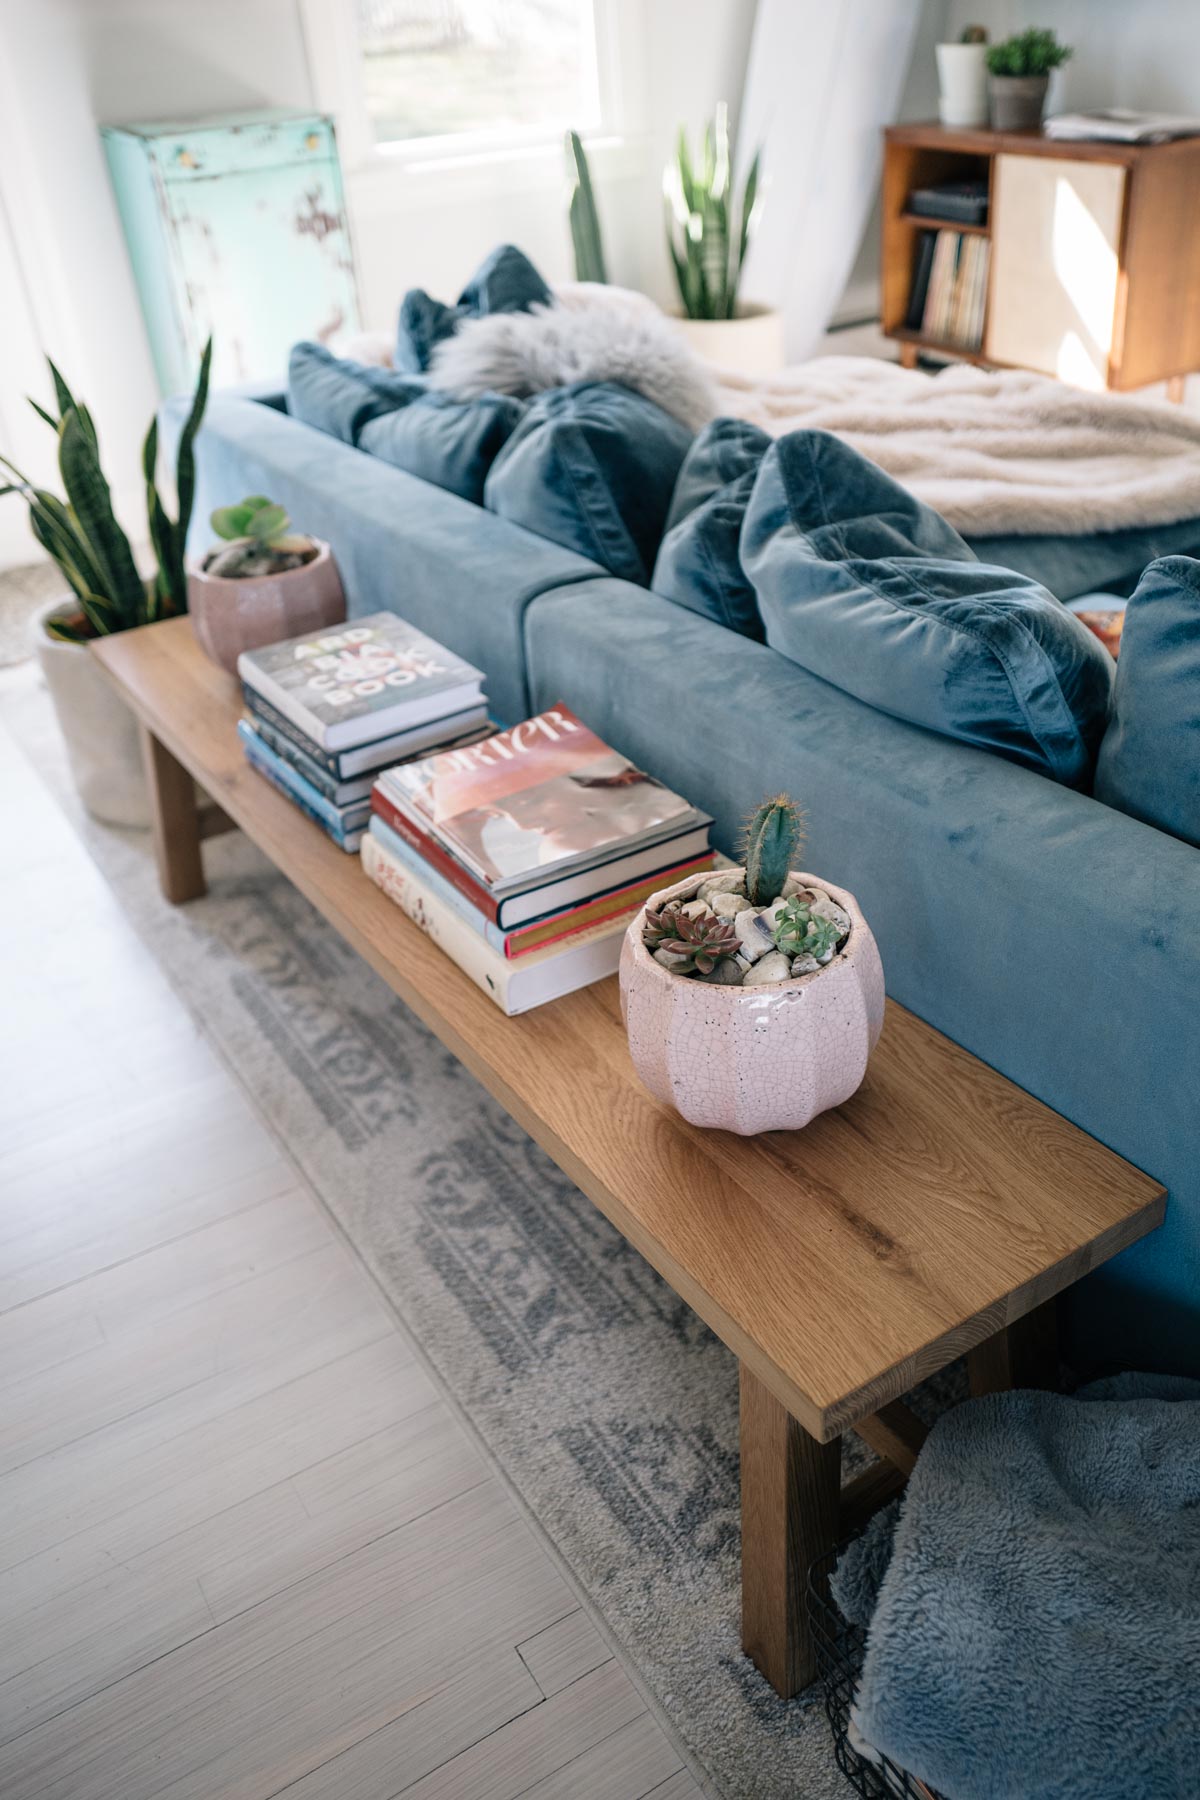 Jess Ann Kirby styles her living room with stylish pieces like a terracotta pot from Anthropologie